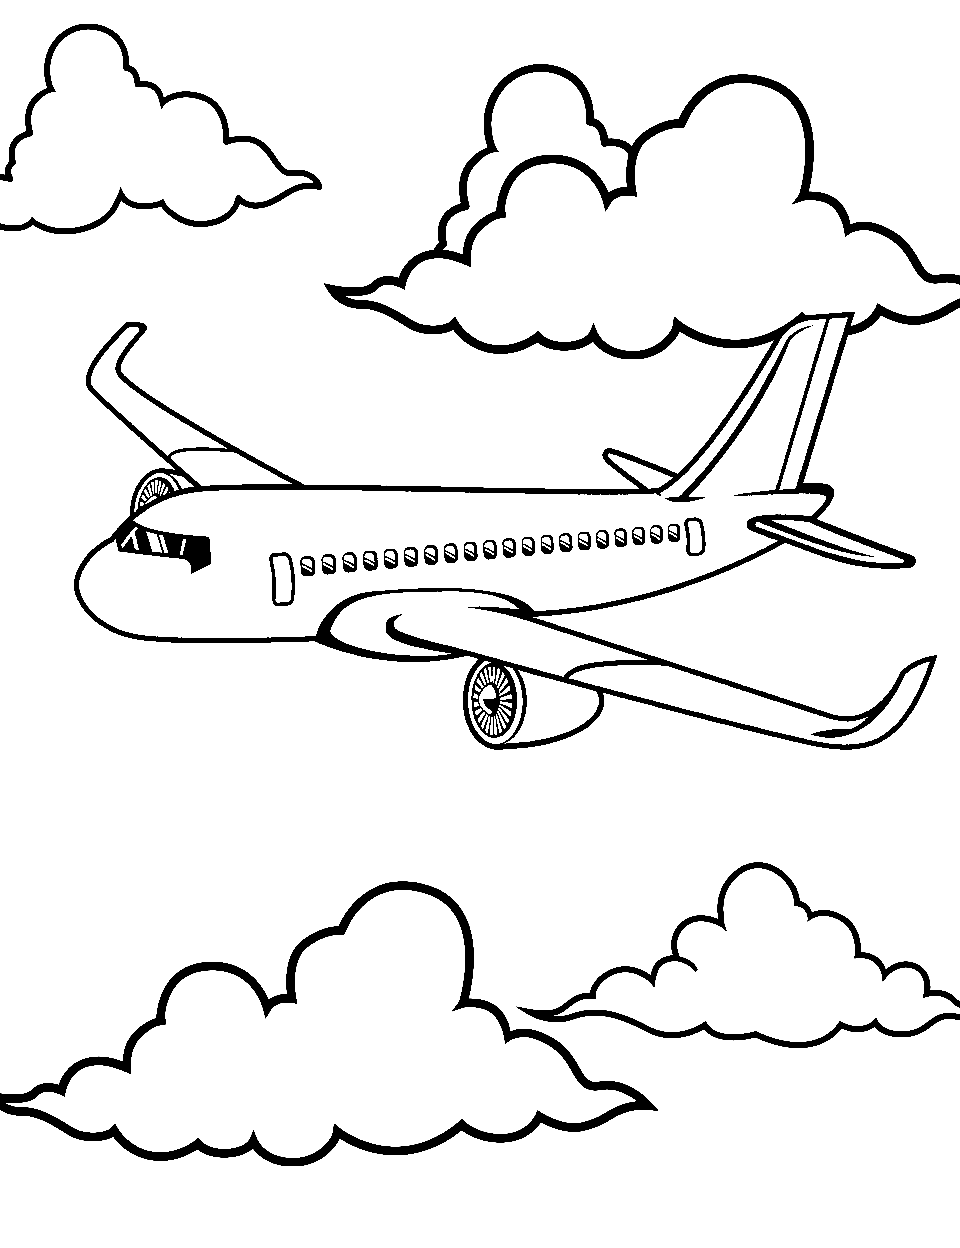 Cloudy Day Flight Airplane Coloring Page - An airplane flying on a cloudy, overcast day.